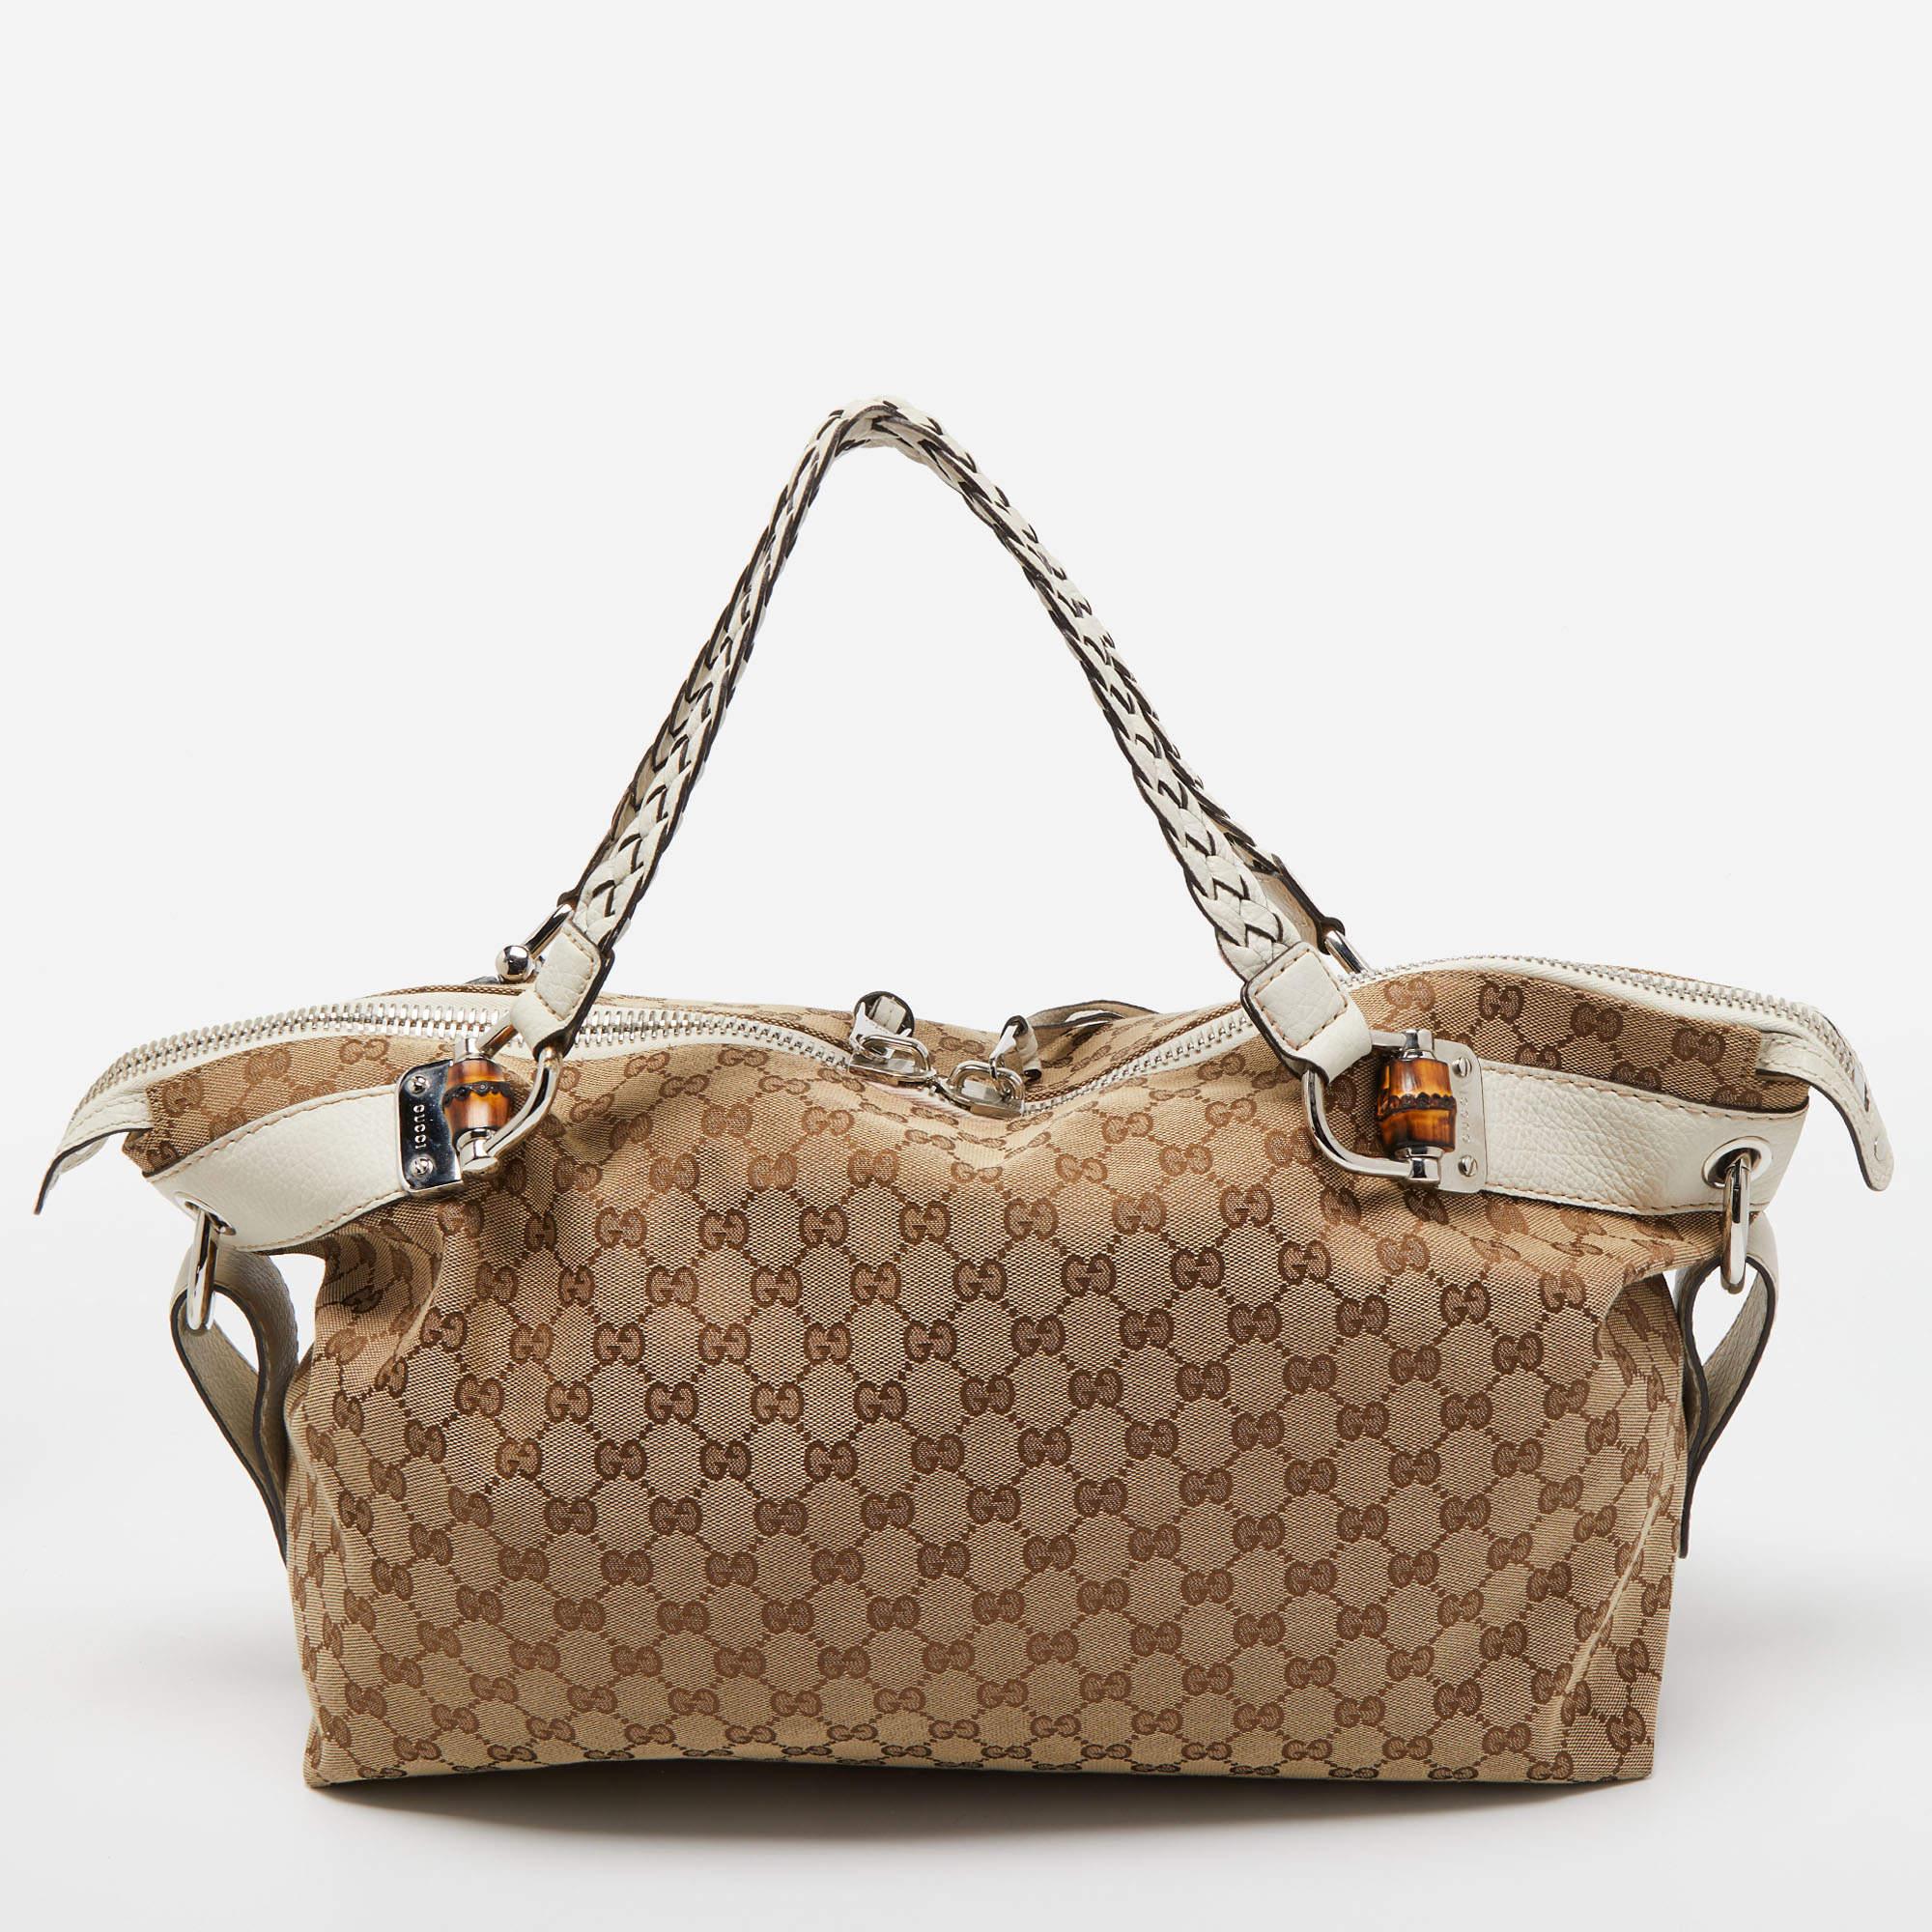 Designed in the iconic and an instantly recognisable GG canvas from Gucci, this Bamboo Bar travel bag is a must have for when you travel. Inject a dose of luxury and effortless style with this travel bag featuring leather accents and two braided top